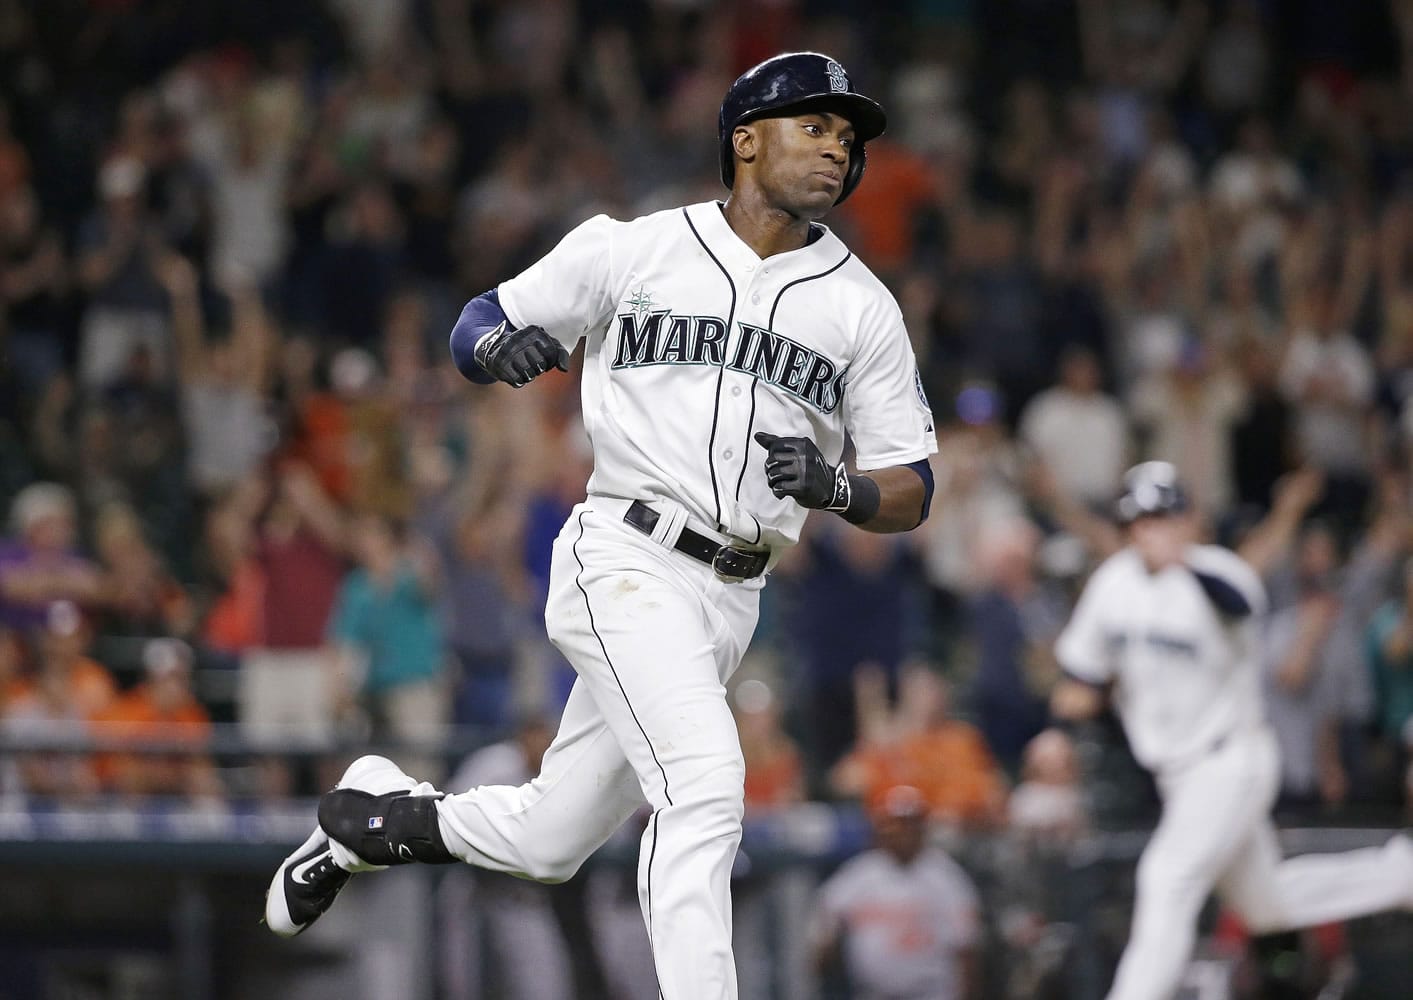 Seattle Mariners' Austin Jackson heads to first after knocking in the winning run as Logan Morrison heads home to score against the Baltimore Orioles in the 10th inning Tuesday, Aug. 11, 2015, in Seattle.